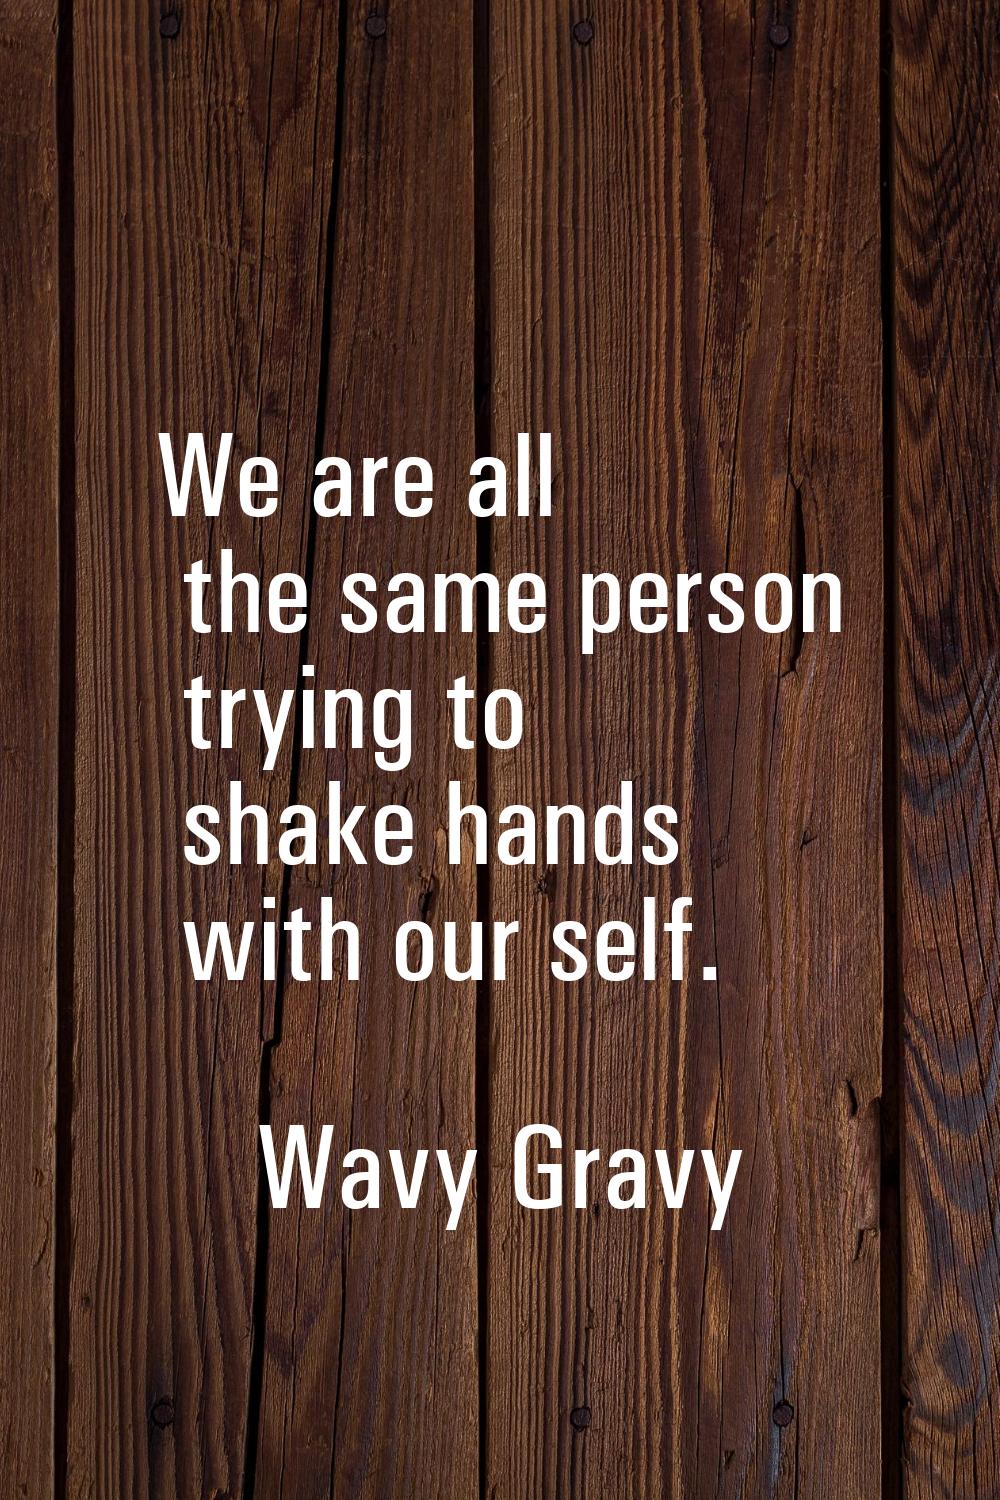 We are all the same person trying to shake hands with our self.